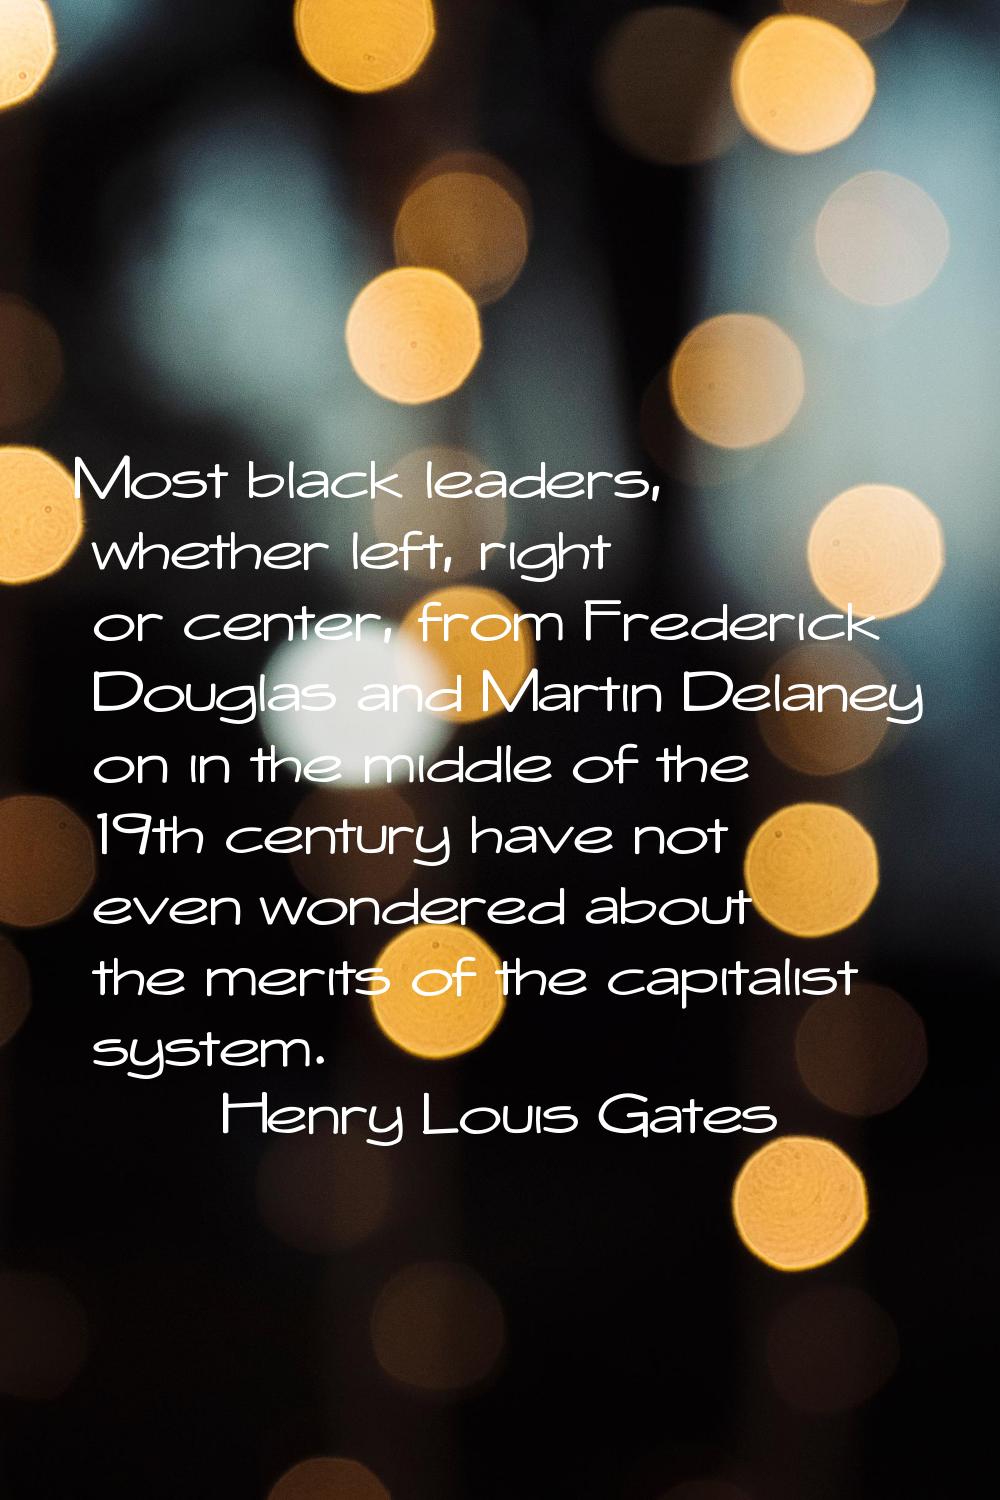 Most black leaders, whether left, right or center, from Frederick Douglas and Martin Delaney on in 